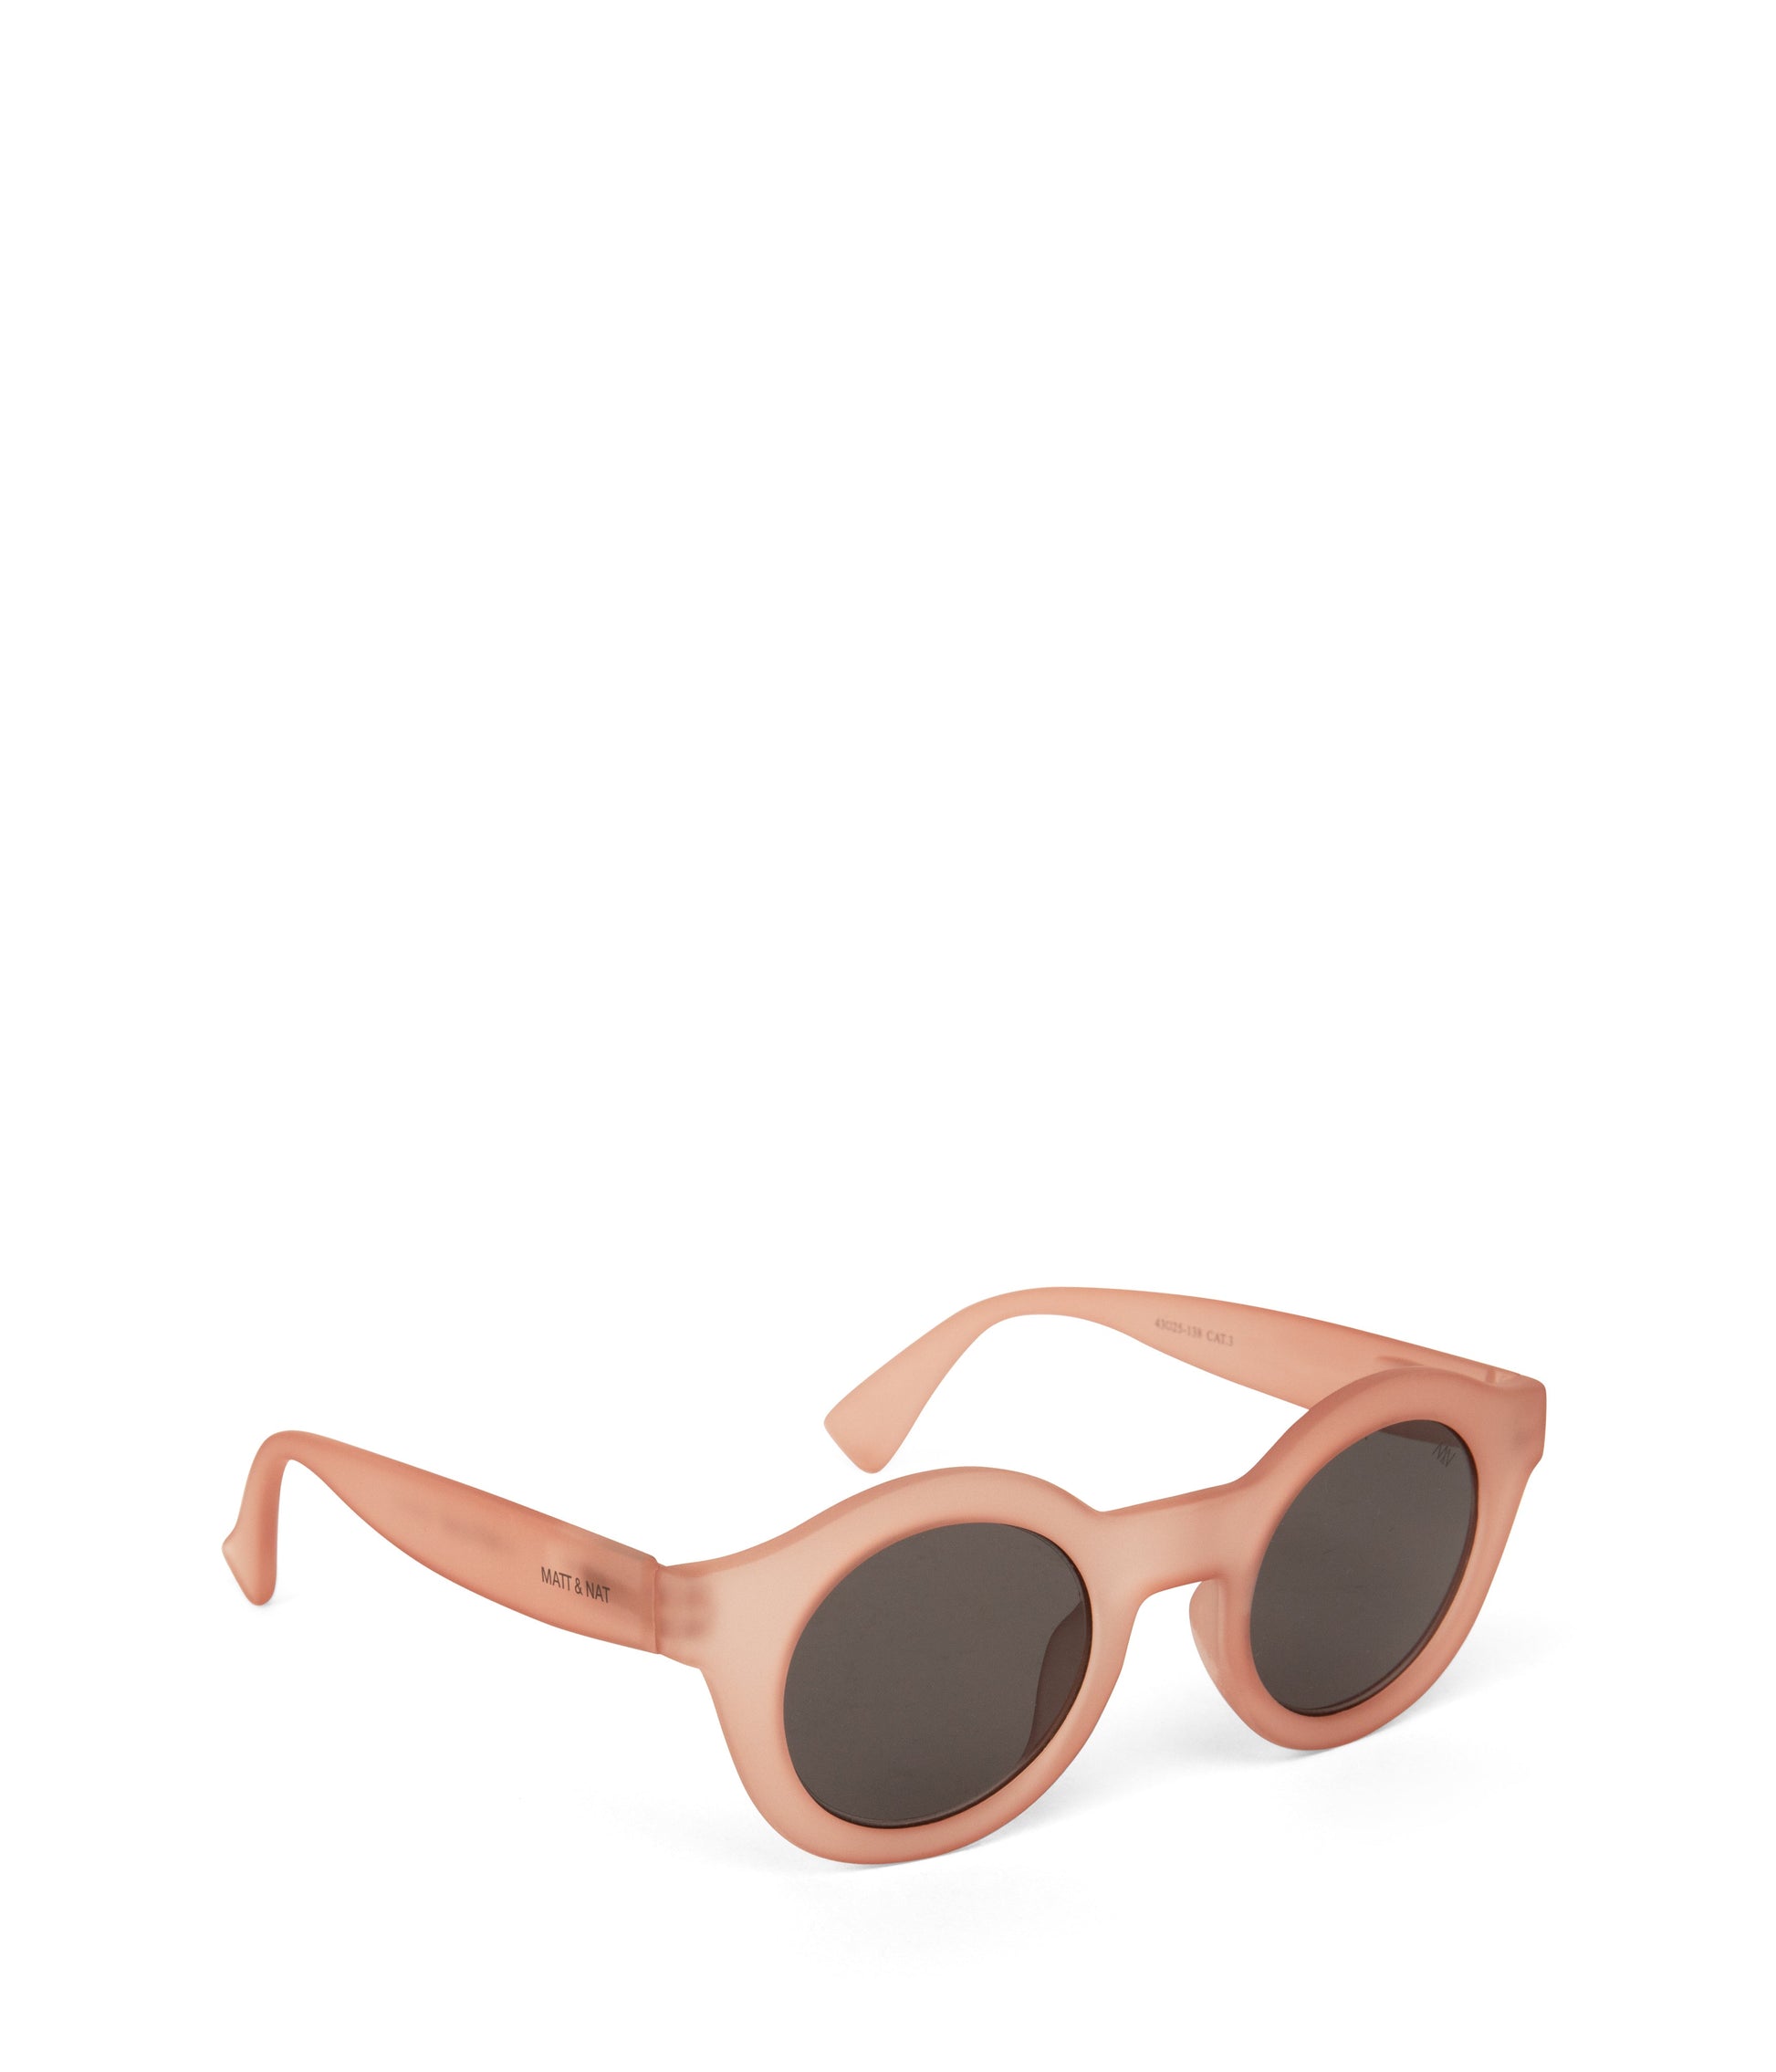 SURIE-2 Recycled Round Sunglasses | Color: Pink - variant::peach